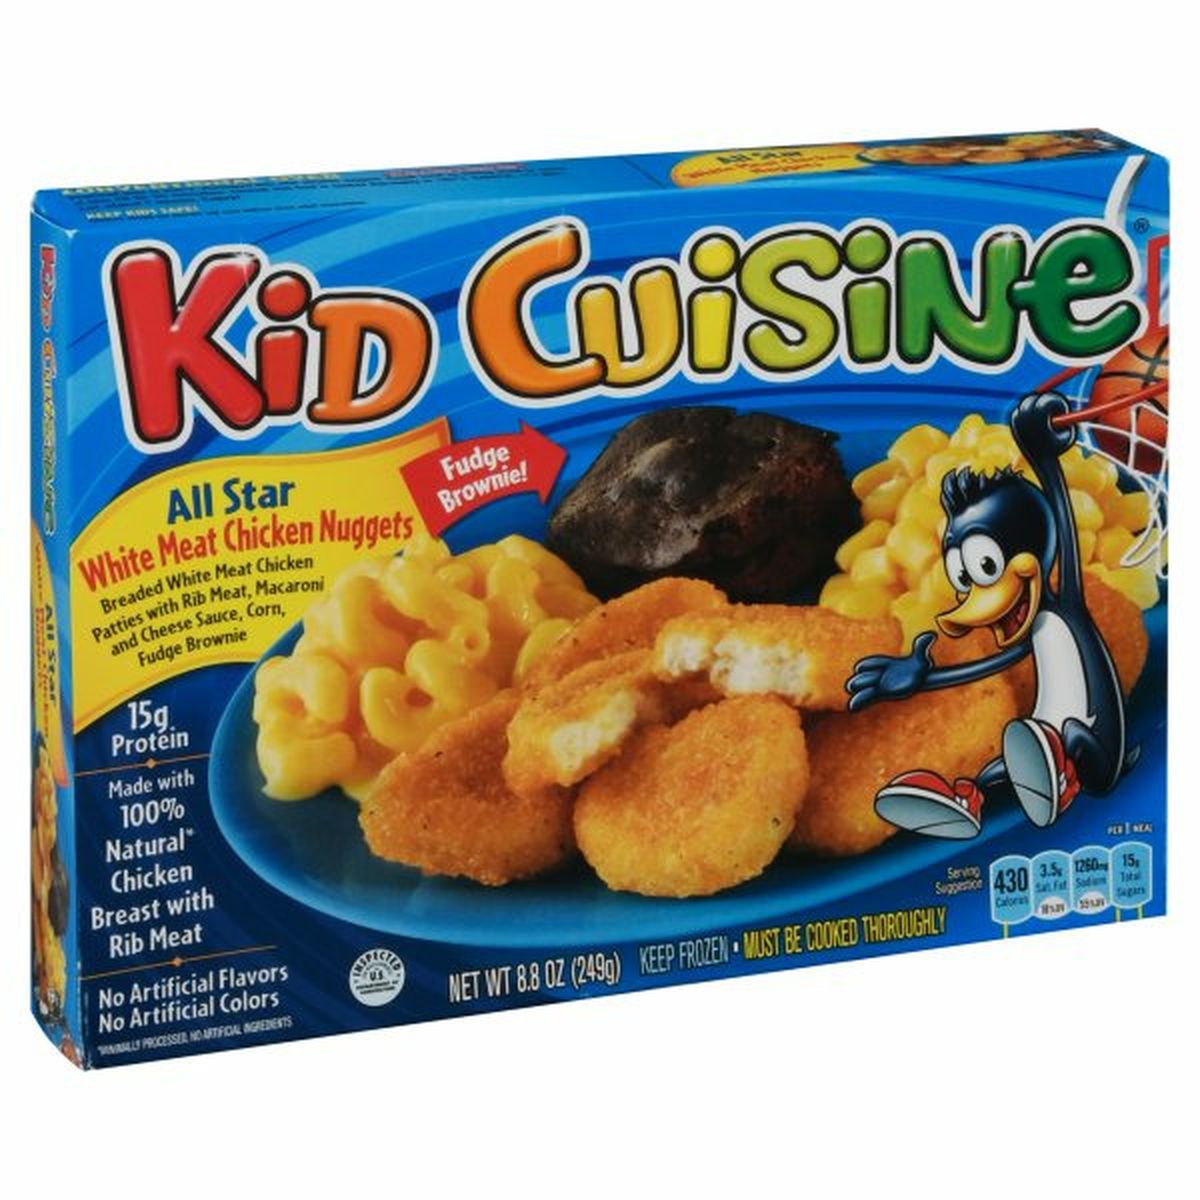 Calories in Kid Cuisine Chicken Nuggets, White Meat, All Star